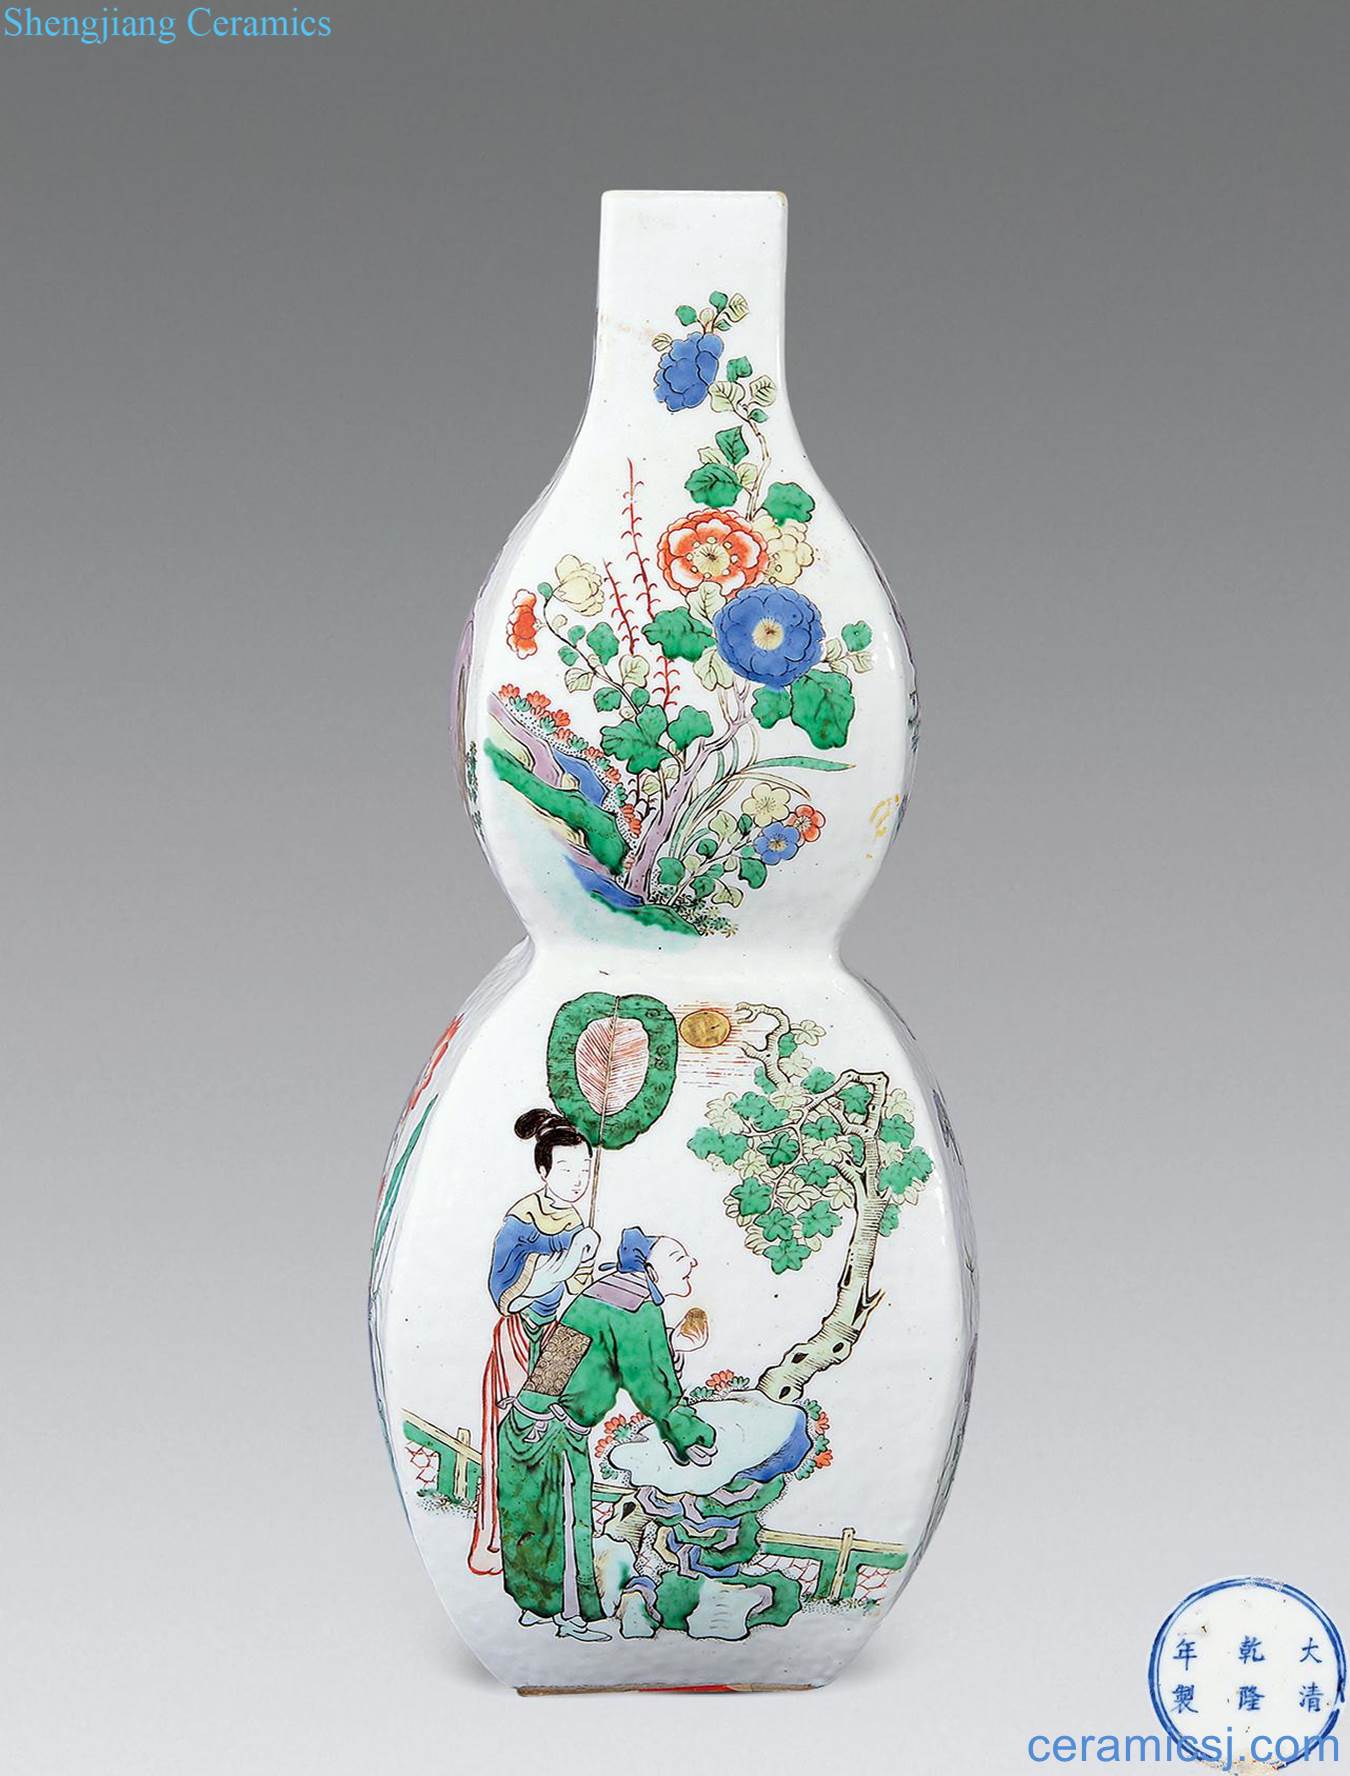 In late qing dynasty Colorful square bottle gourd